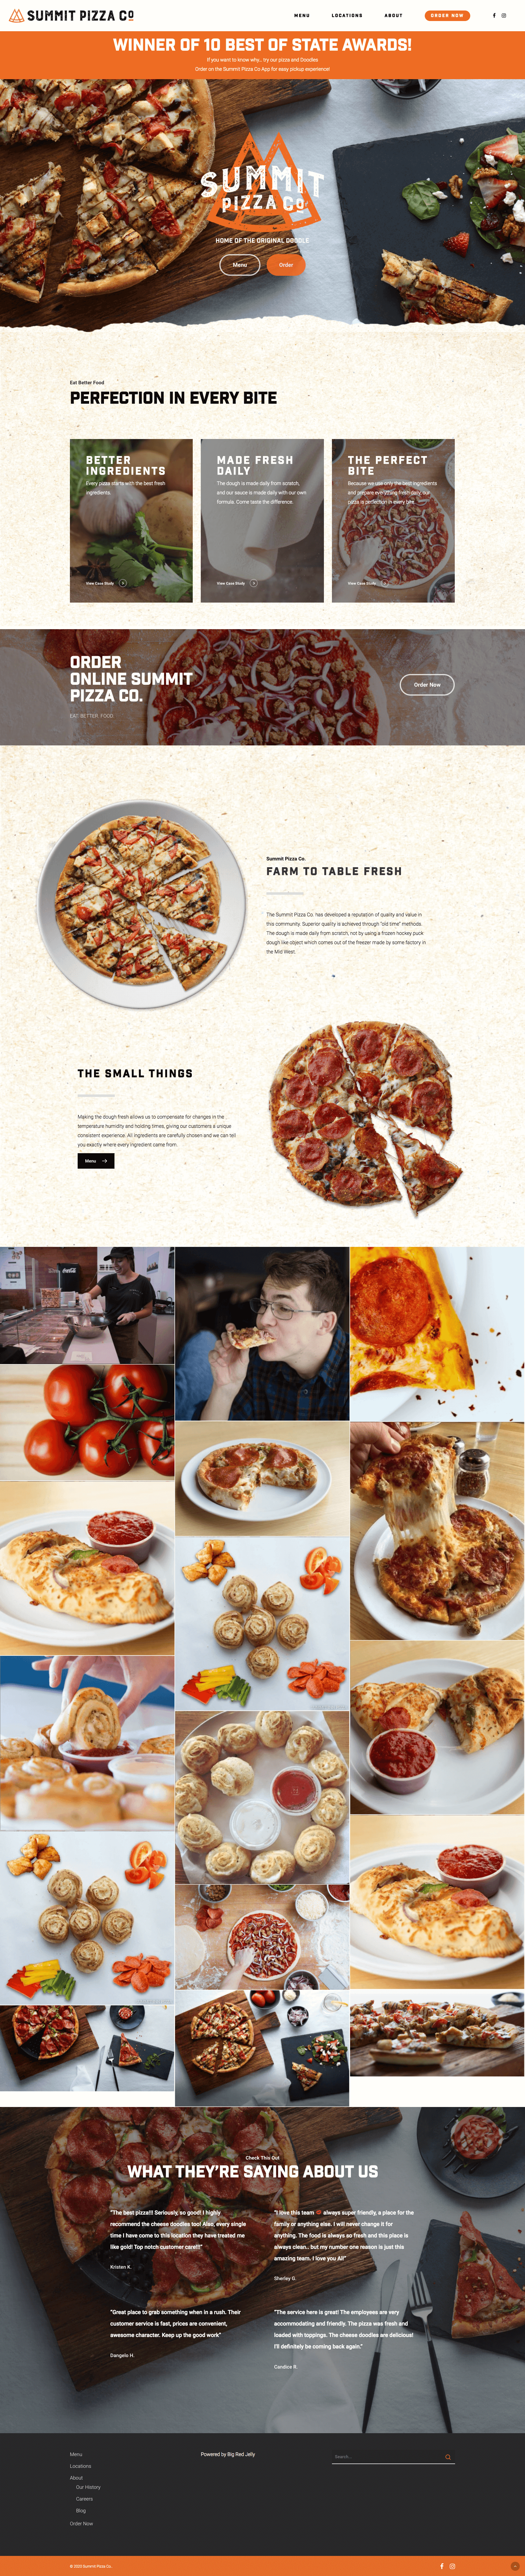 Summit pizza full website design - brand building at Big Red Jelly.